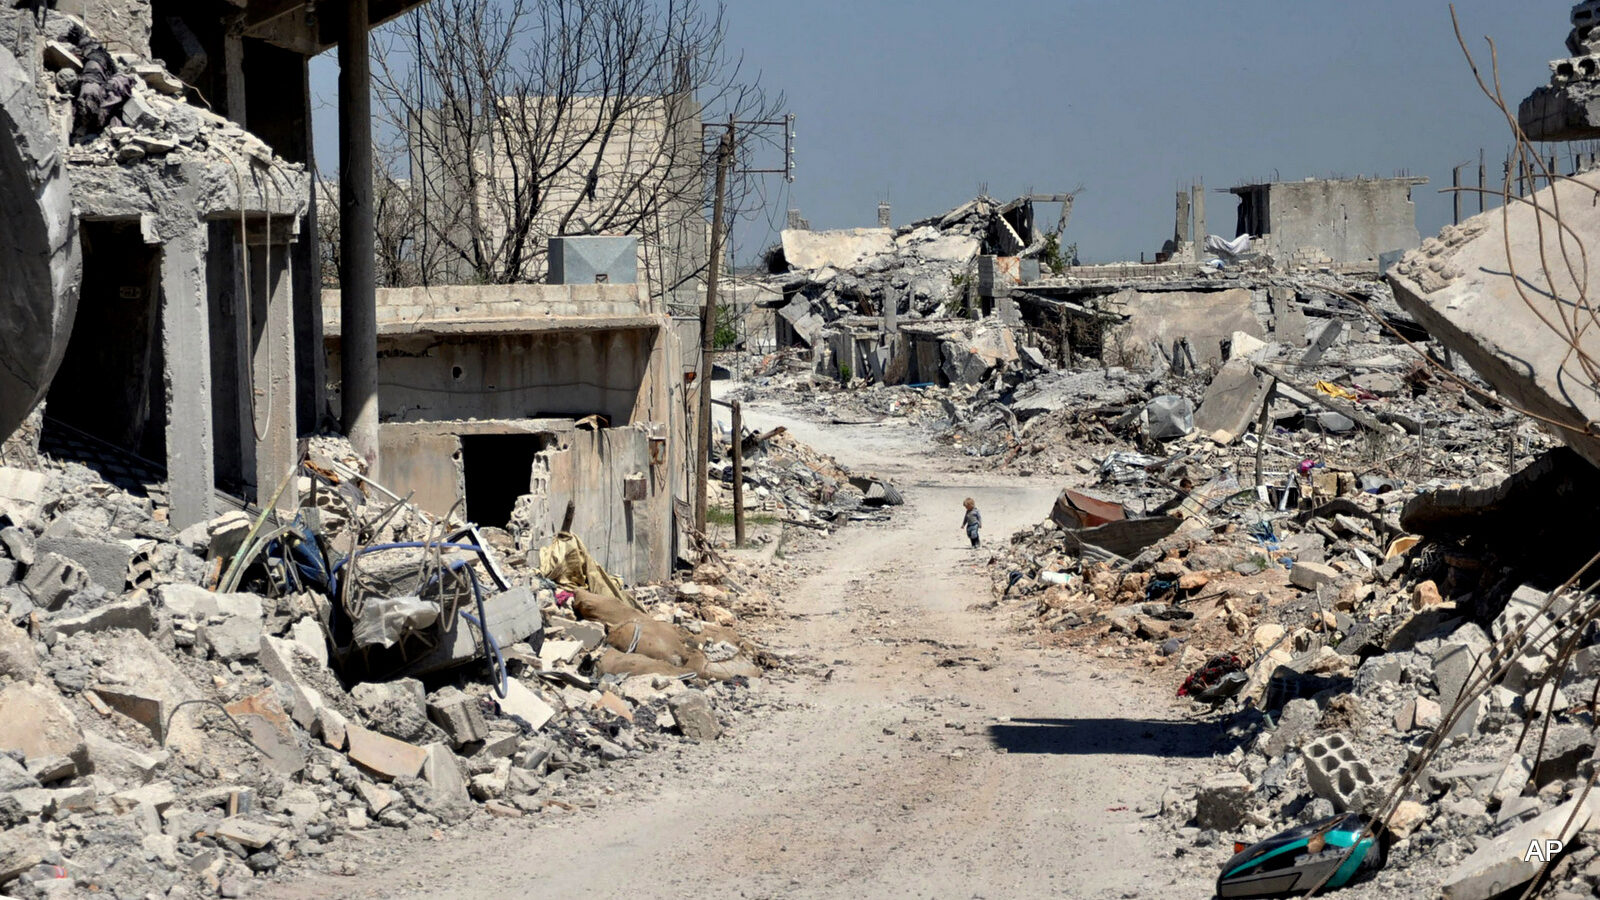 A Kurdish boy, center background, walks between buildings that were destroyed during the battle between the U.S. backed Kurdish forces and the Islamic State fighters, in Kobani, north Syria. The Kurdish town on the Turkish-Syrian border is still a haunting, apocalyptic vista of hollowed out facades and streets littered with unexploded ordnance - a testimony to the massive price that came with the victory over IS. (AP Photo/Mehmet Shakir)